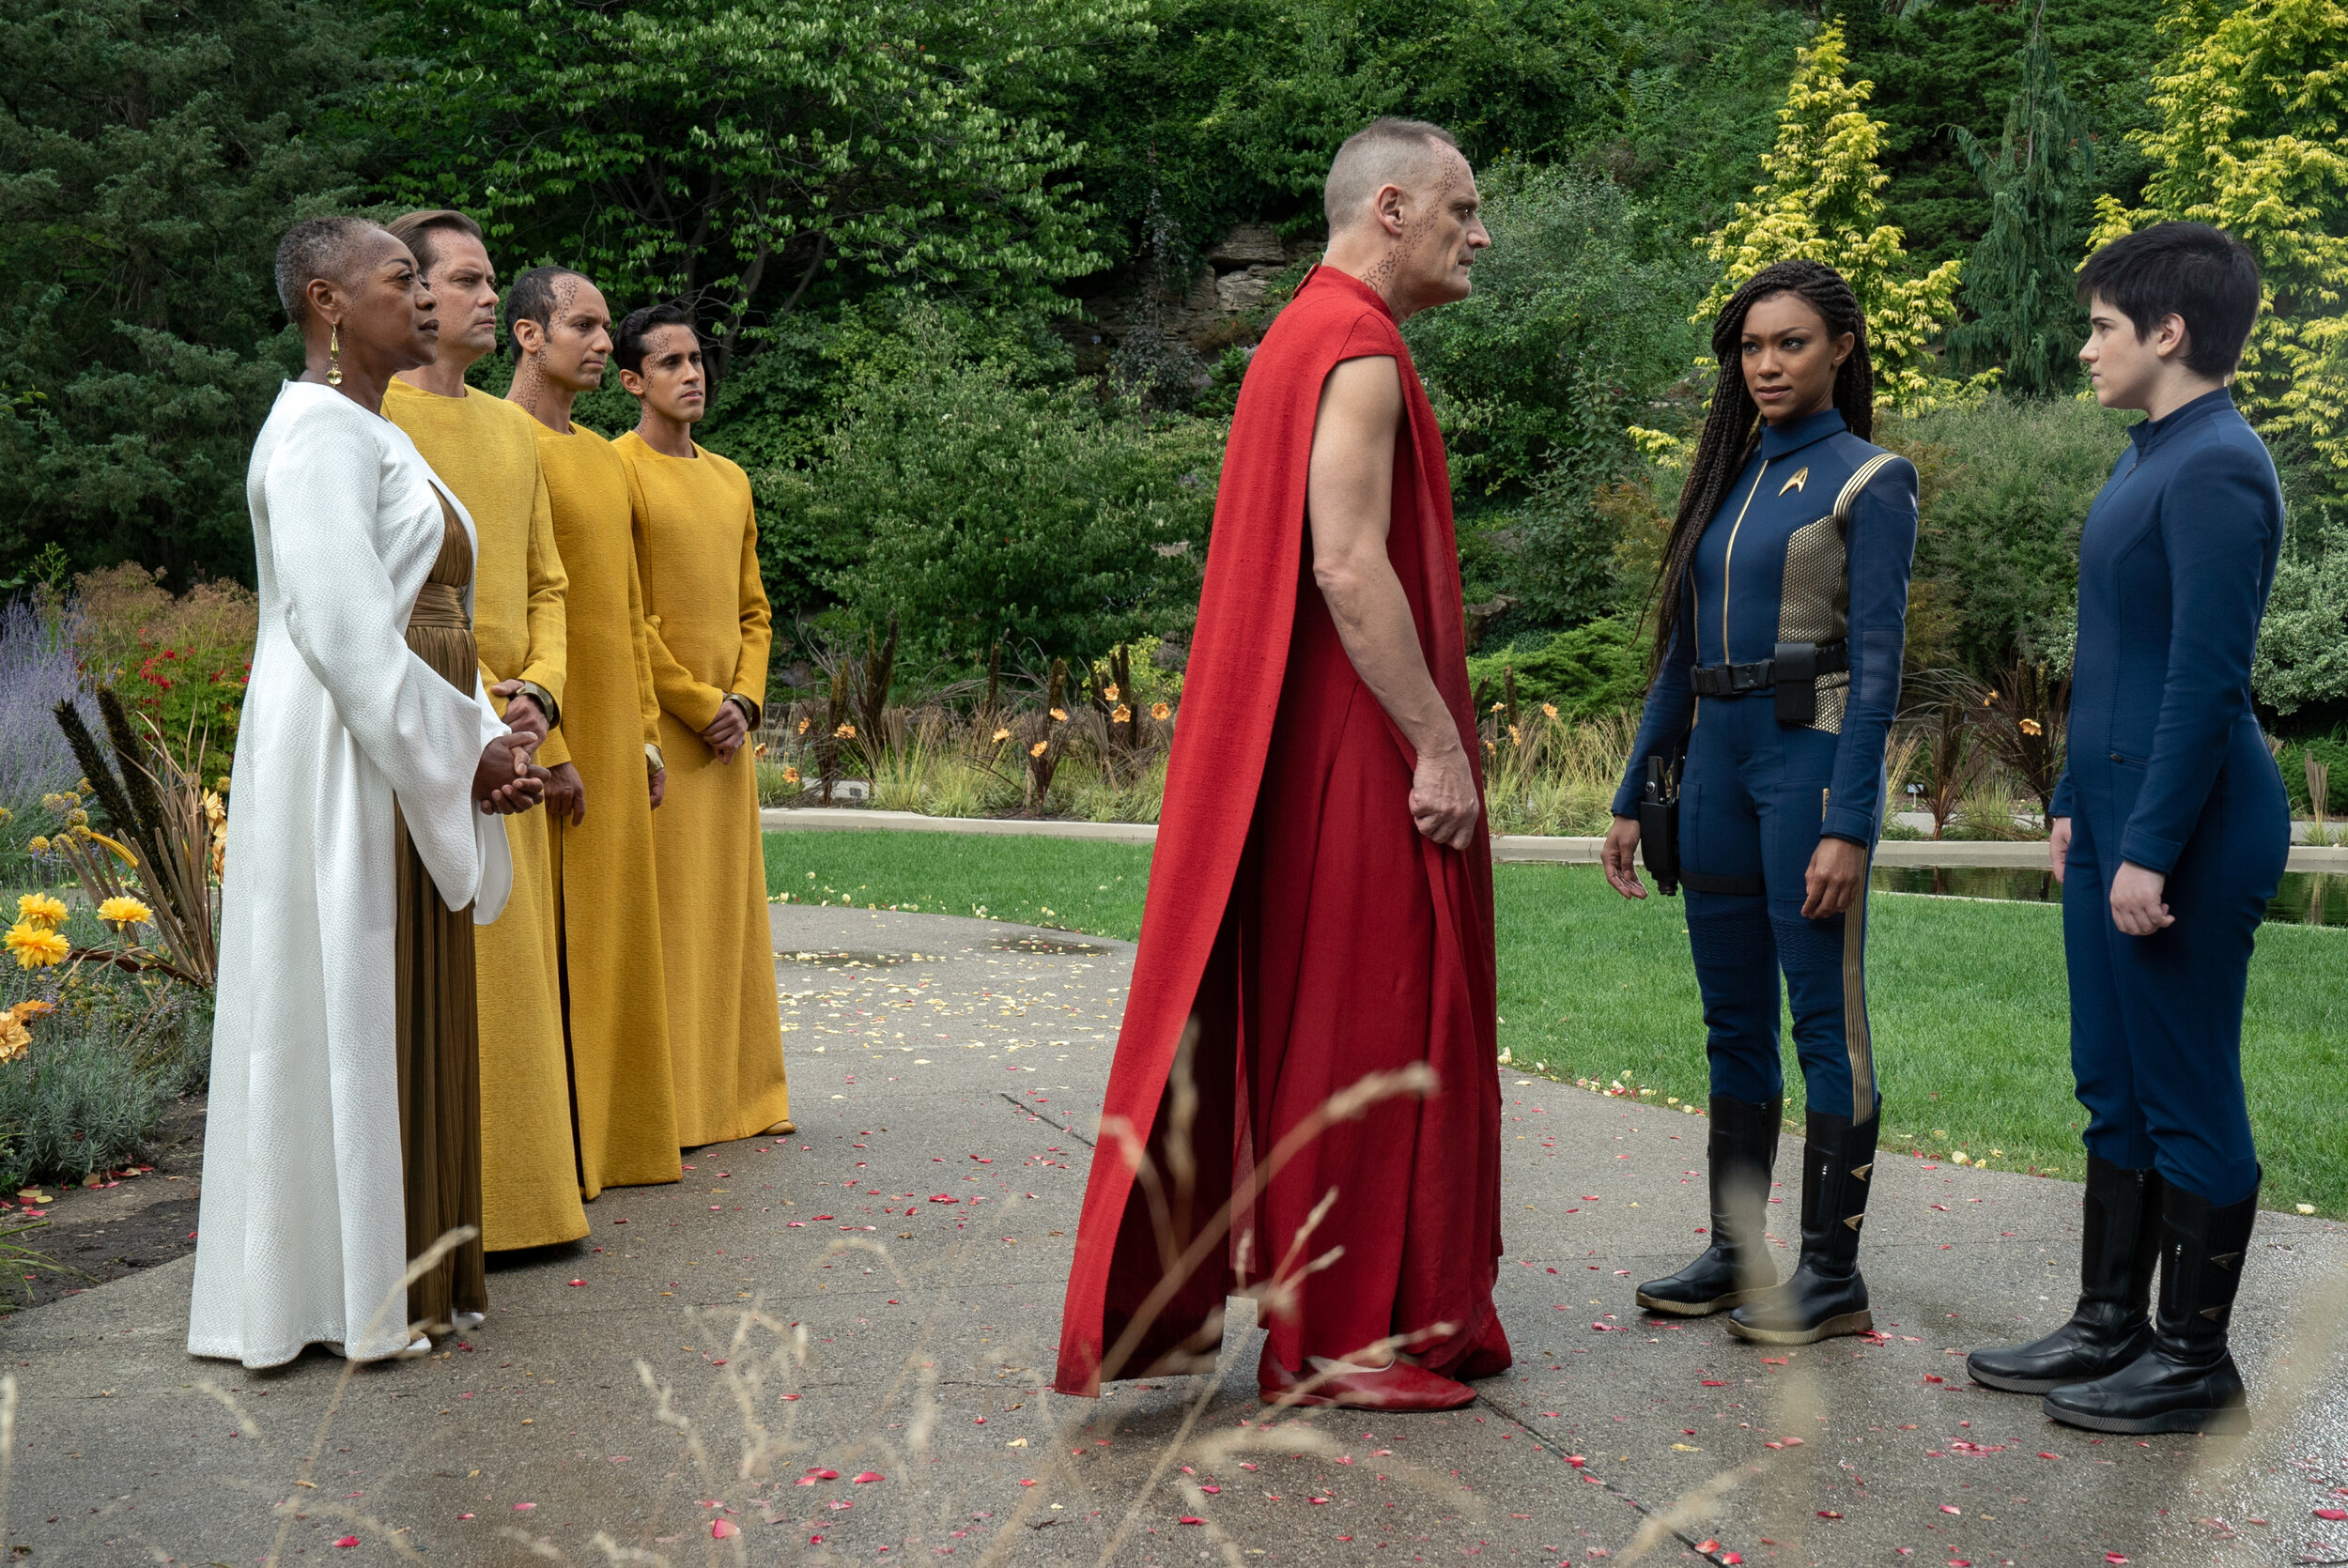   "Forget Me Not" -- Ep#304 -- Pictured (l-r): Karen Robinson as Leader Pav, Andres Apergis as Guardian Xi, Sonequa Martin-Green as Burnham and Blu del Barrio as Adira of the CBS All Access series STAR TREK: DISCOVERY. Photo Cr: Michael Gibson/CBS ©2